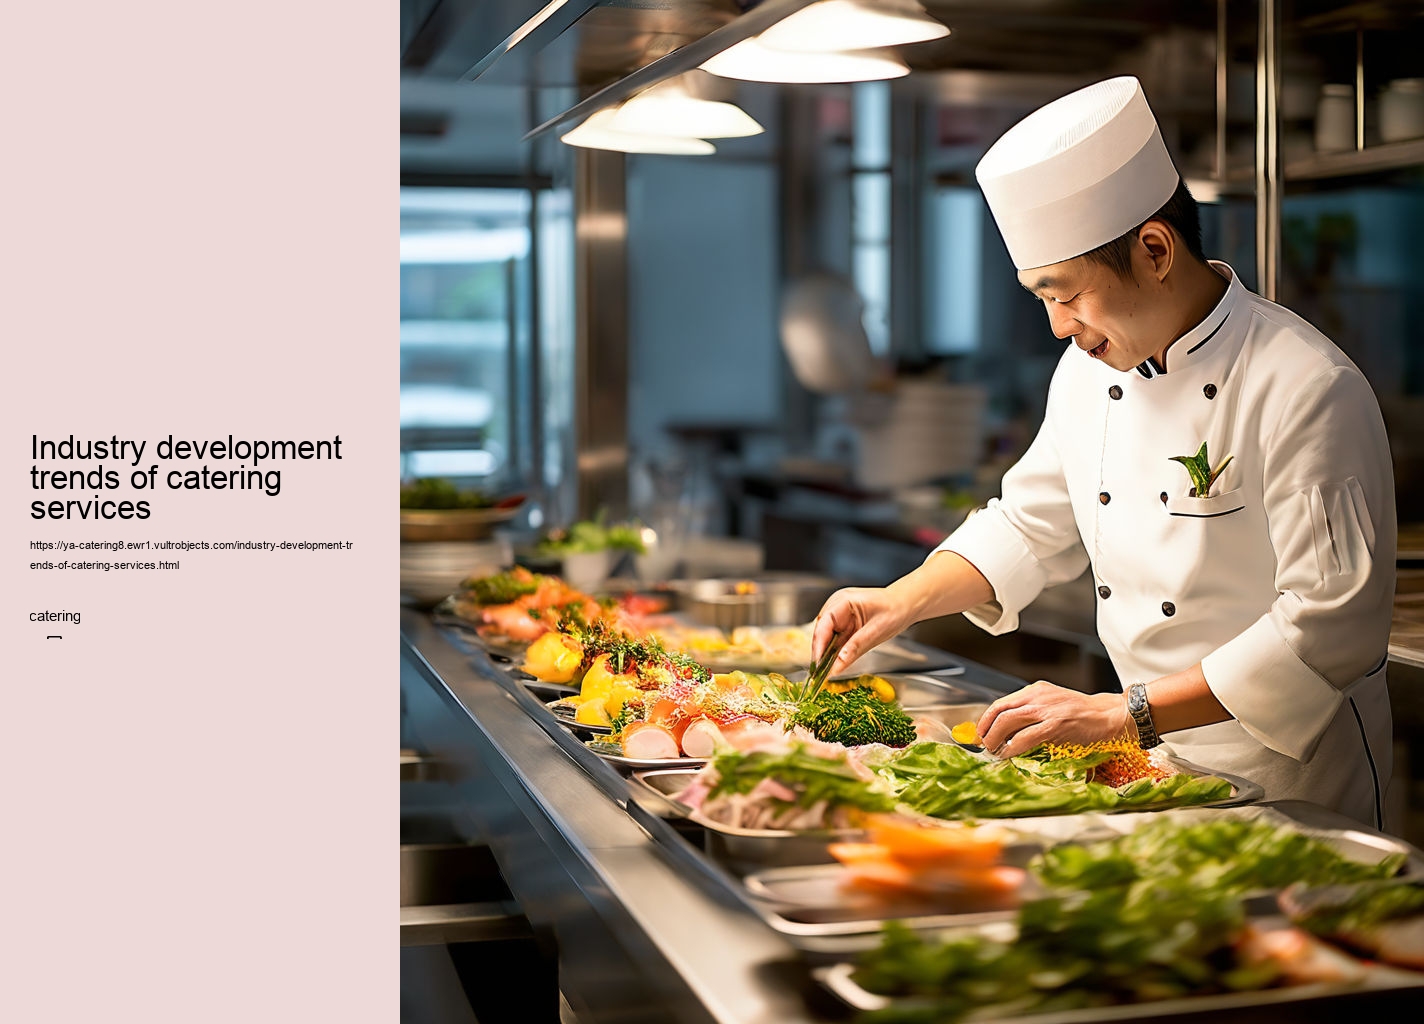 Industry development trends of catering services